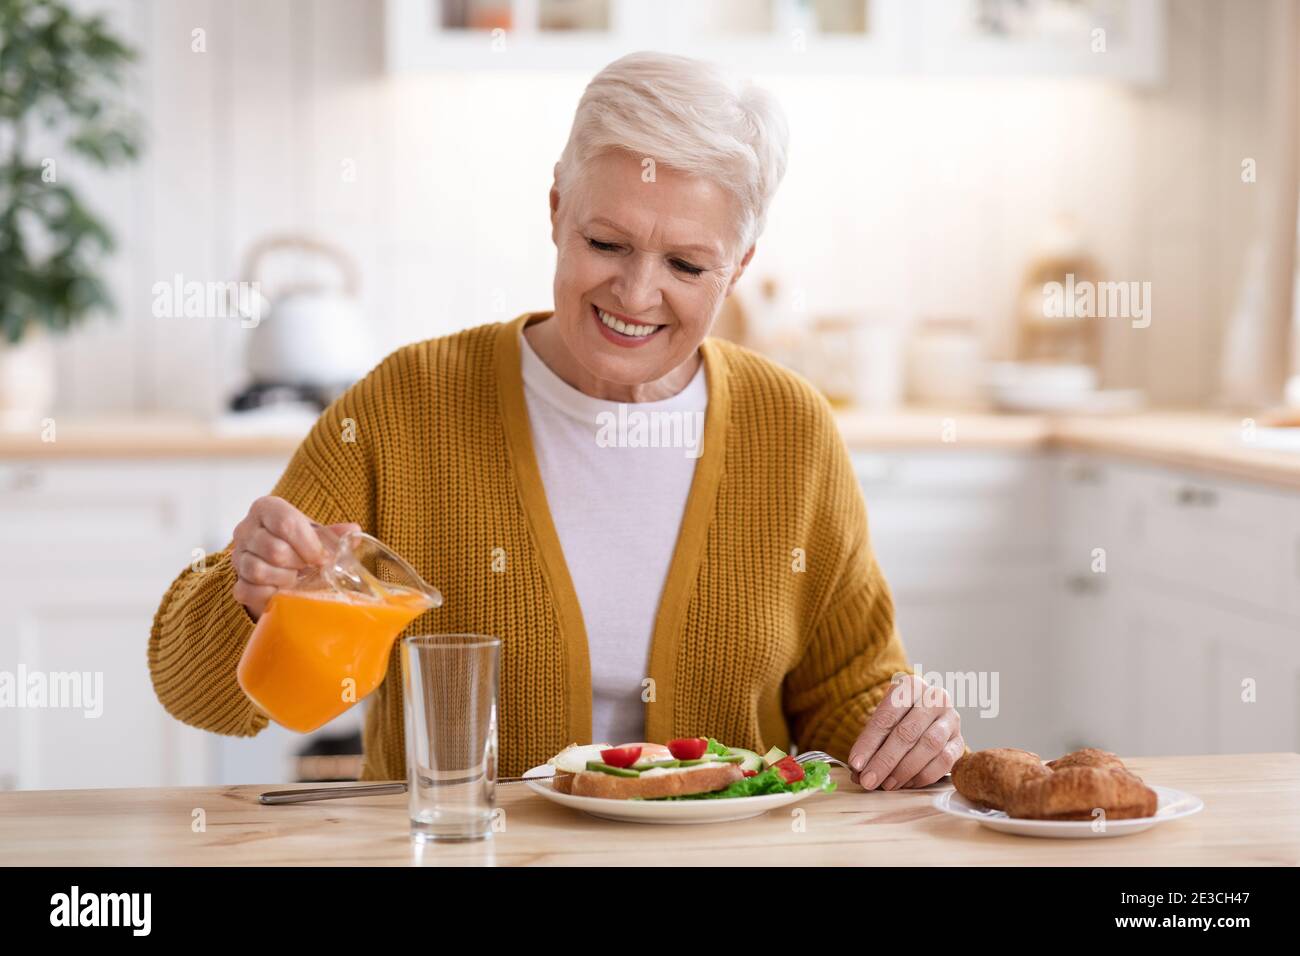 Attractive old lady pouring juice, having lunch in kitchen Stock Photo